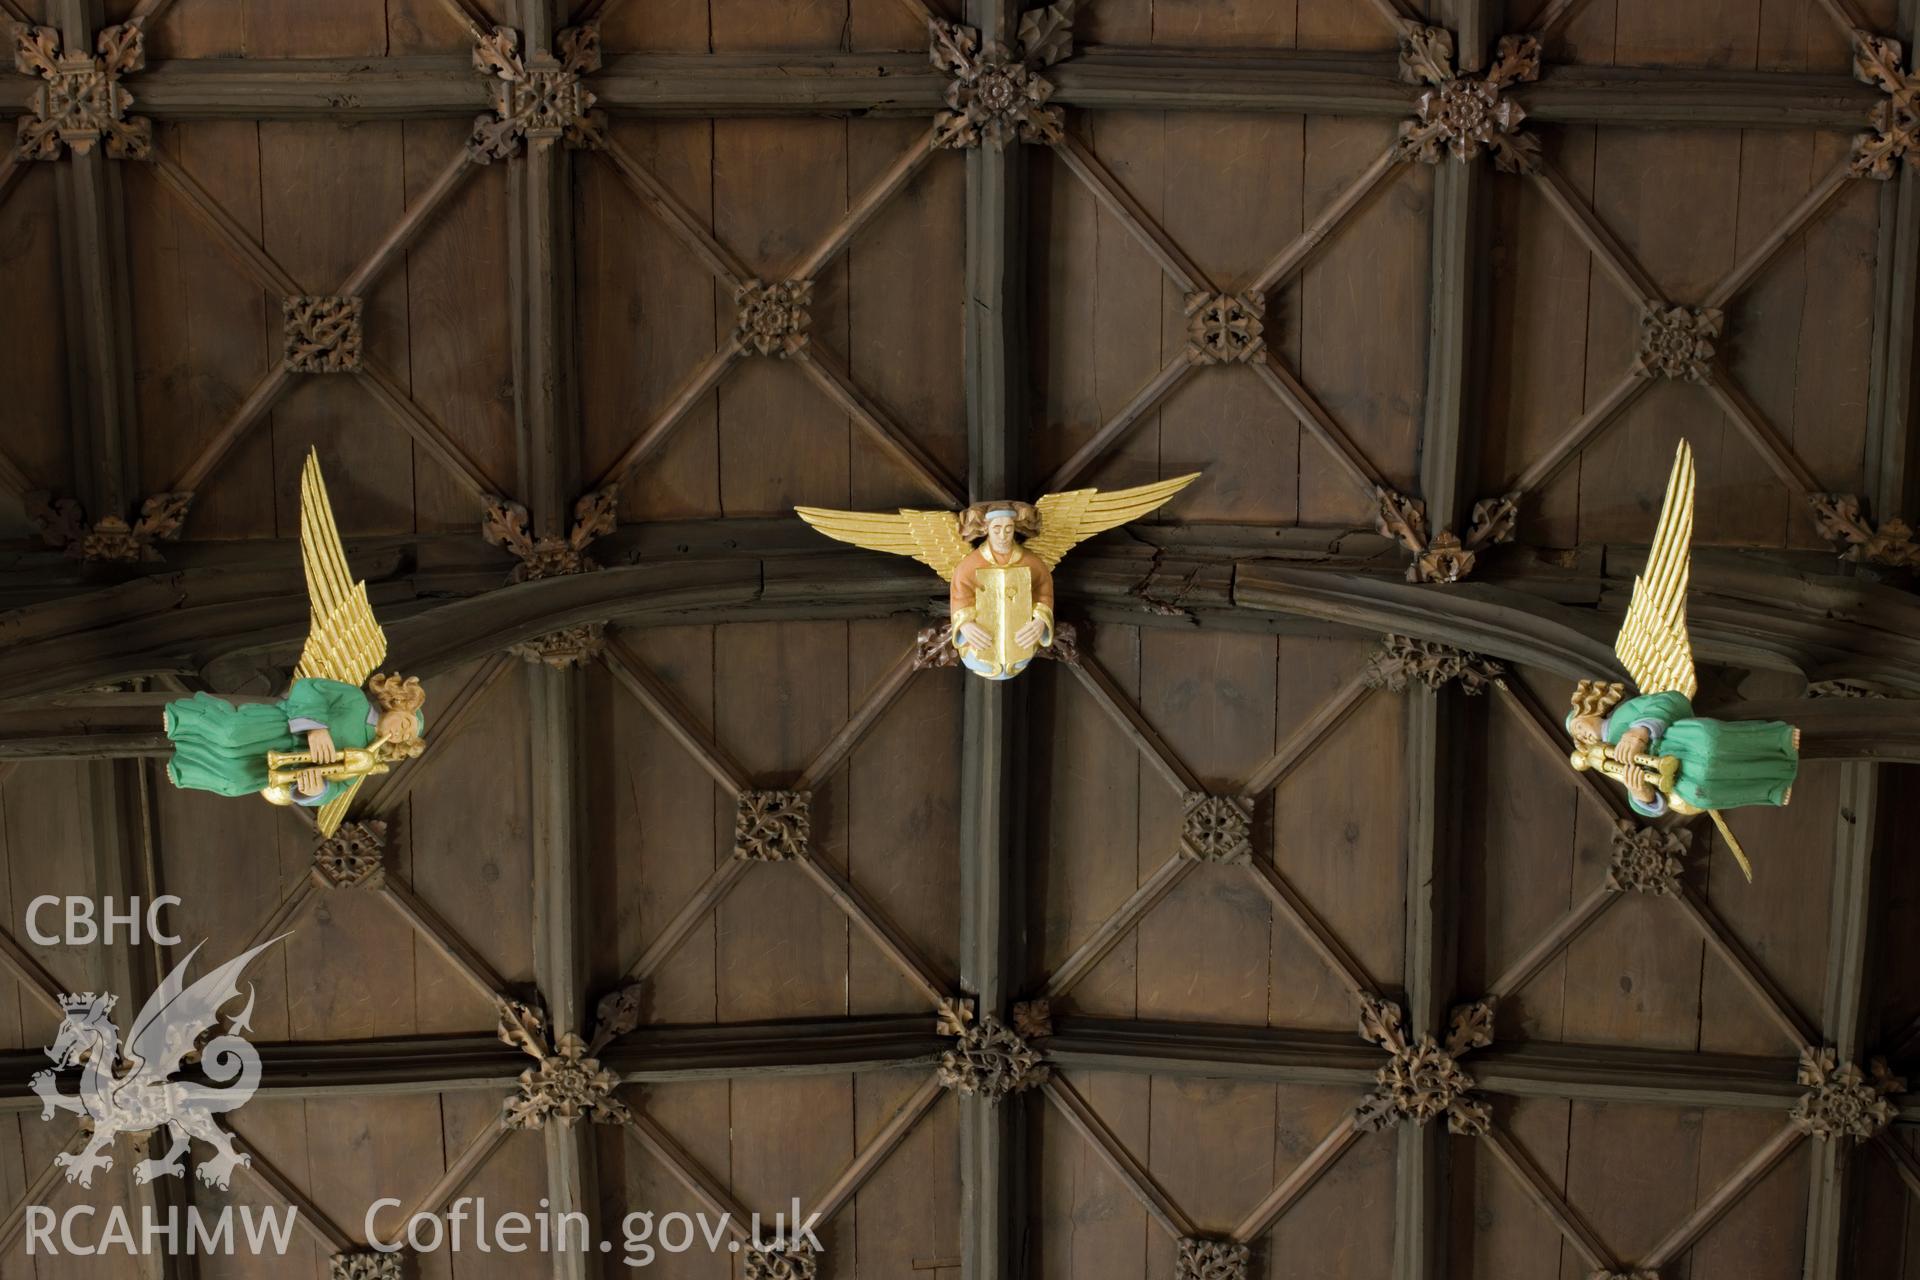 Carved angels on ceiling.